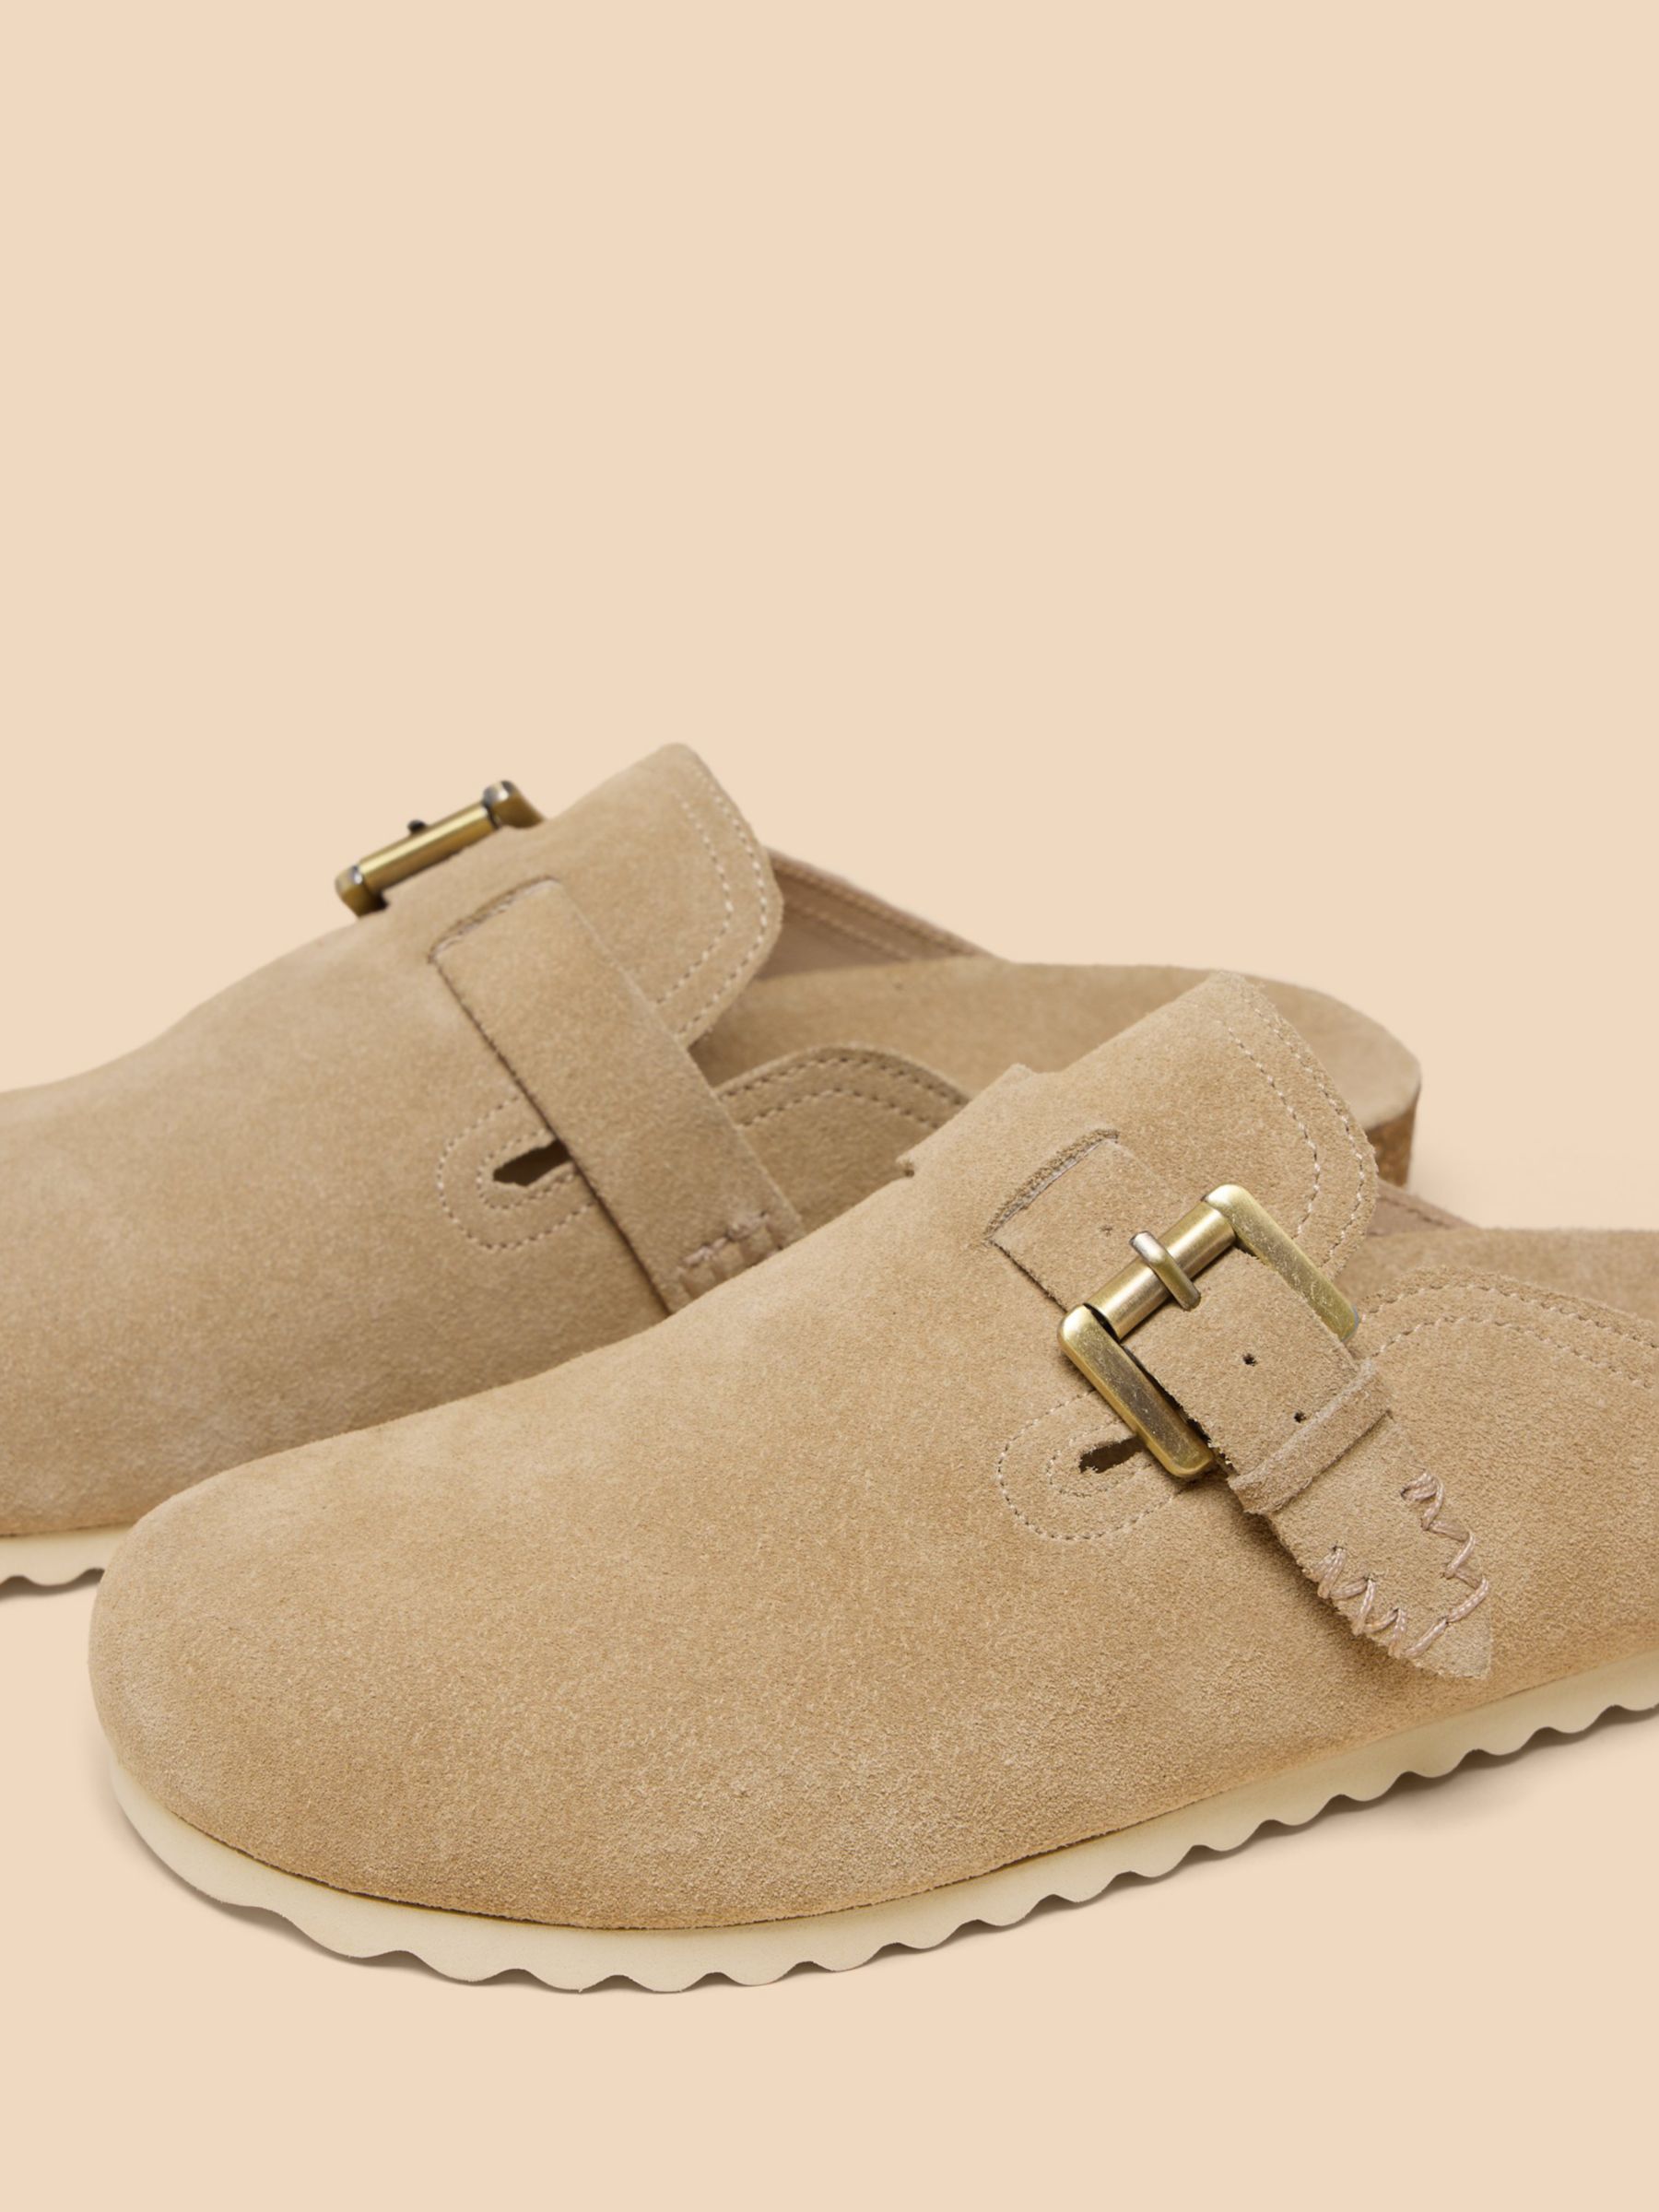 Buy White Stuff Suede Slip On Mules, Natural Online at johnlewis.com